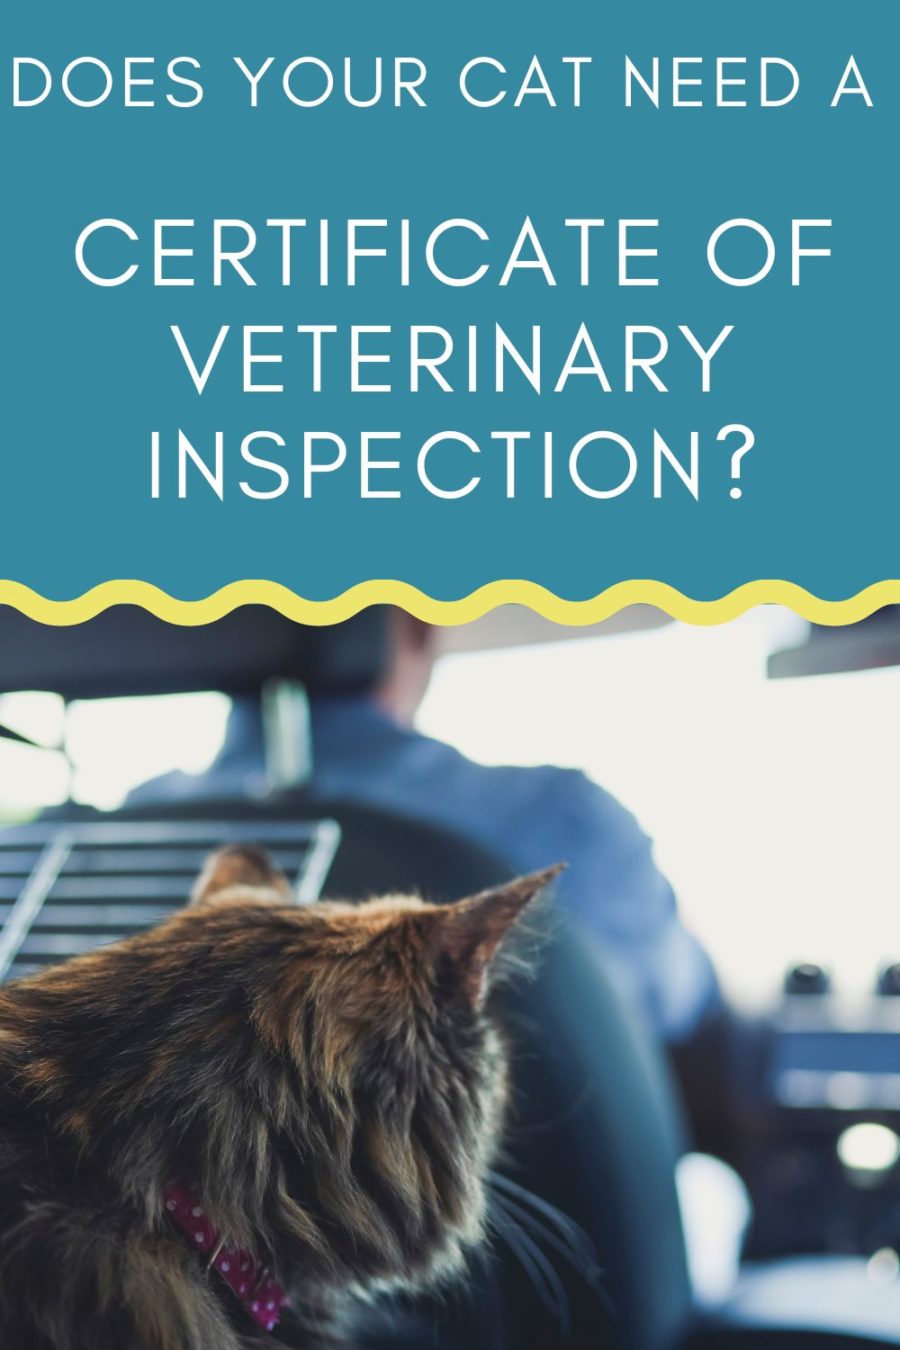 Does your cat need a certificate of veterinary inspection when traveling?